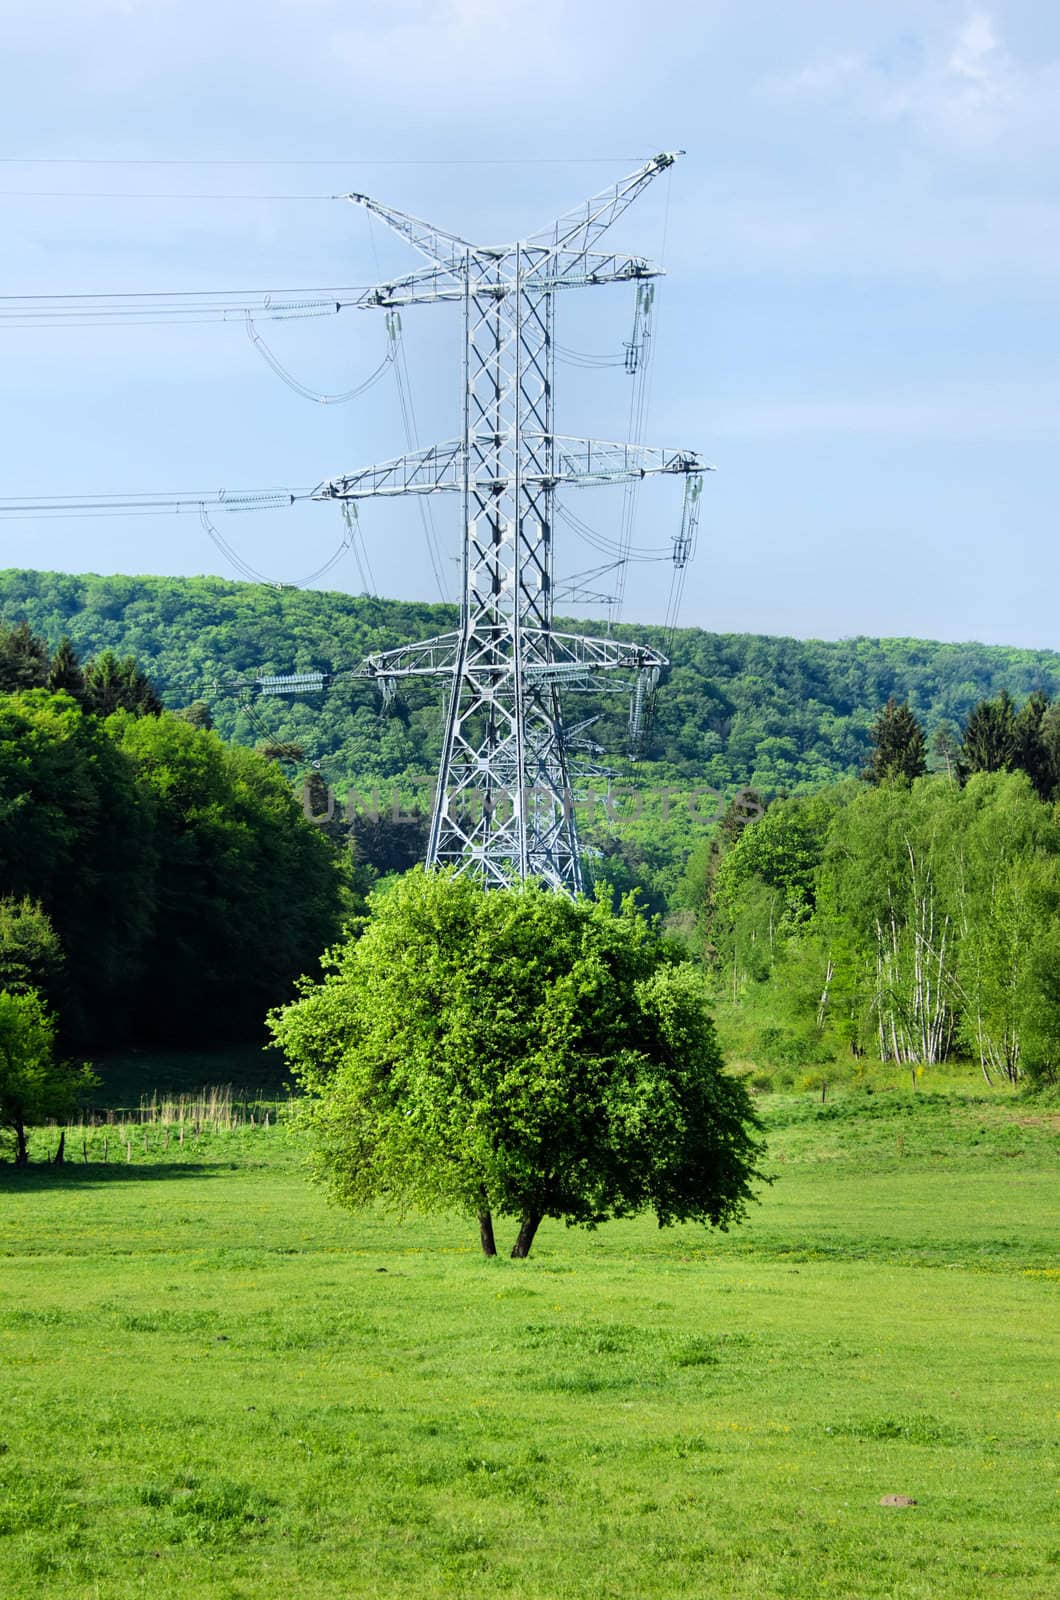 the little tree and the large electricity pylon by njaj